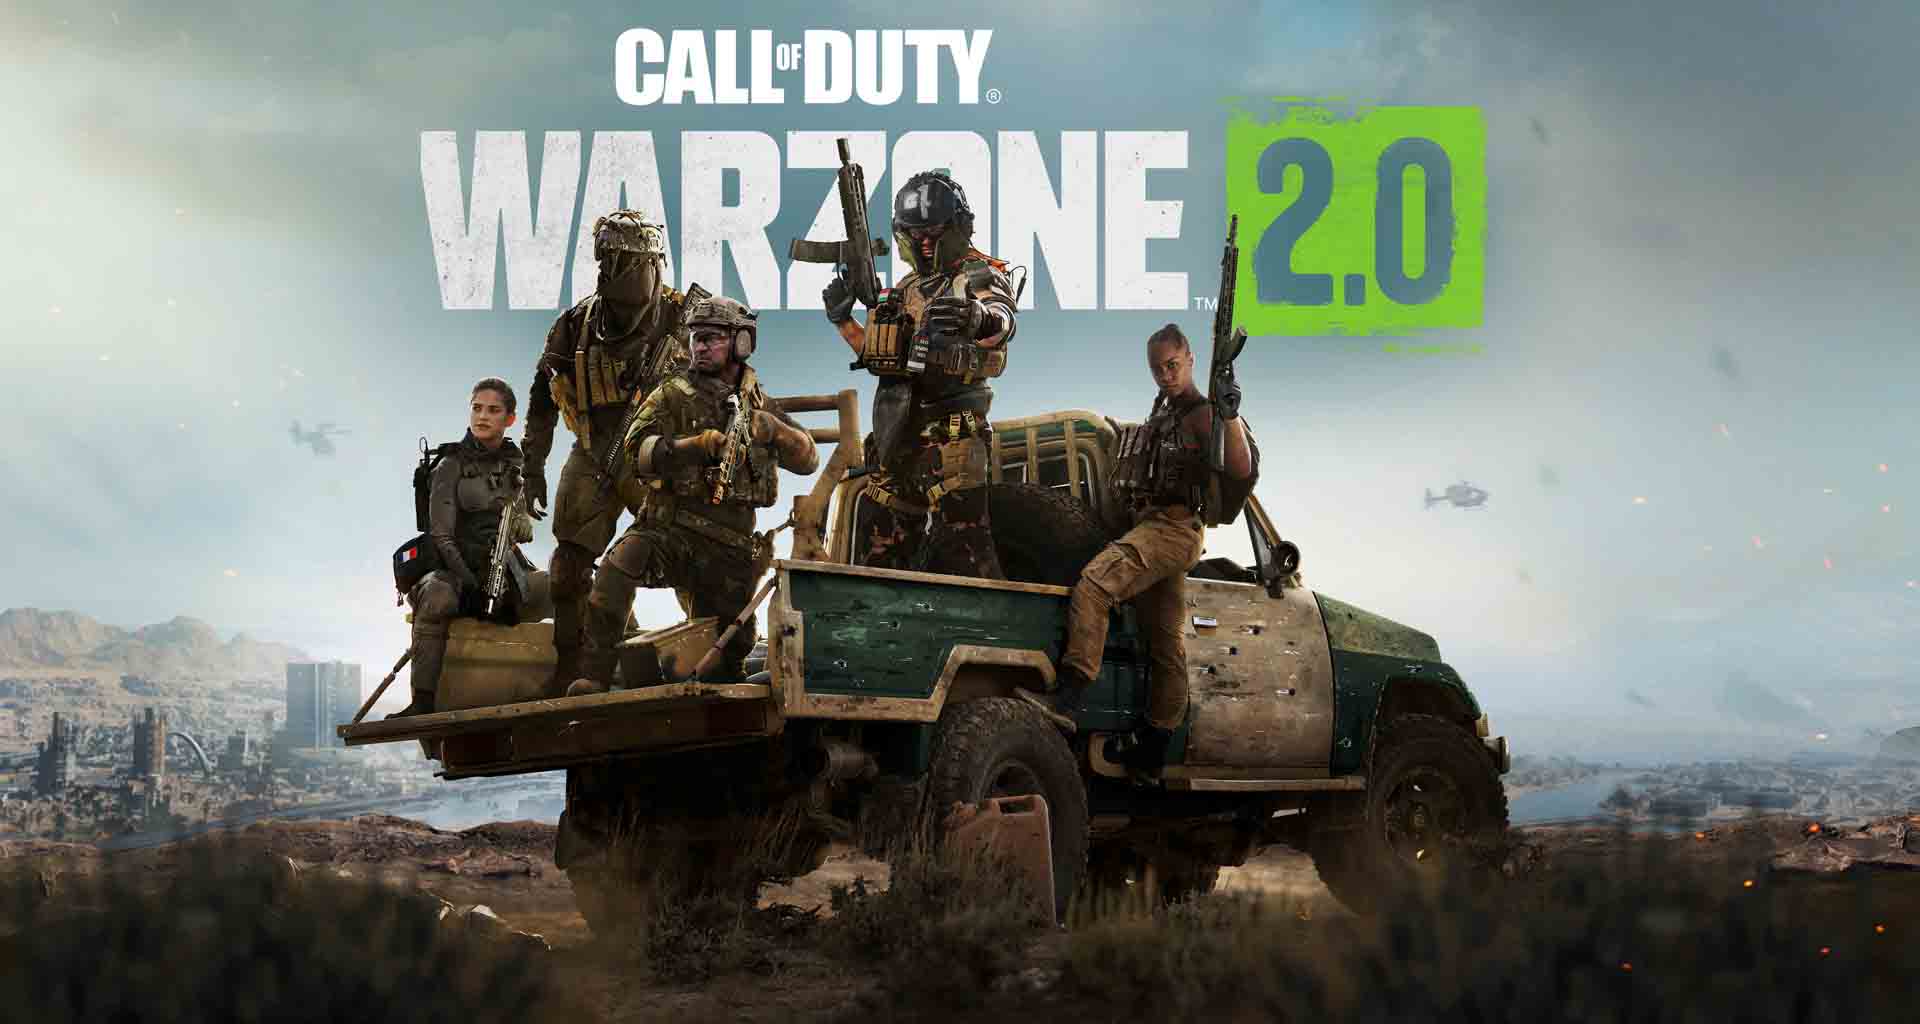 *BREAKING – PRELOAD LIVE NOW* Warzone 2 preload time – when can you download Warzone 2.0?